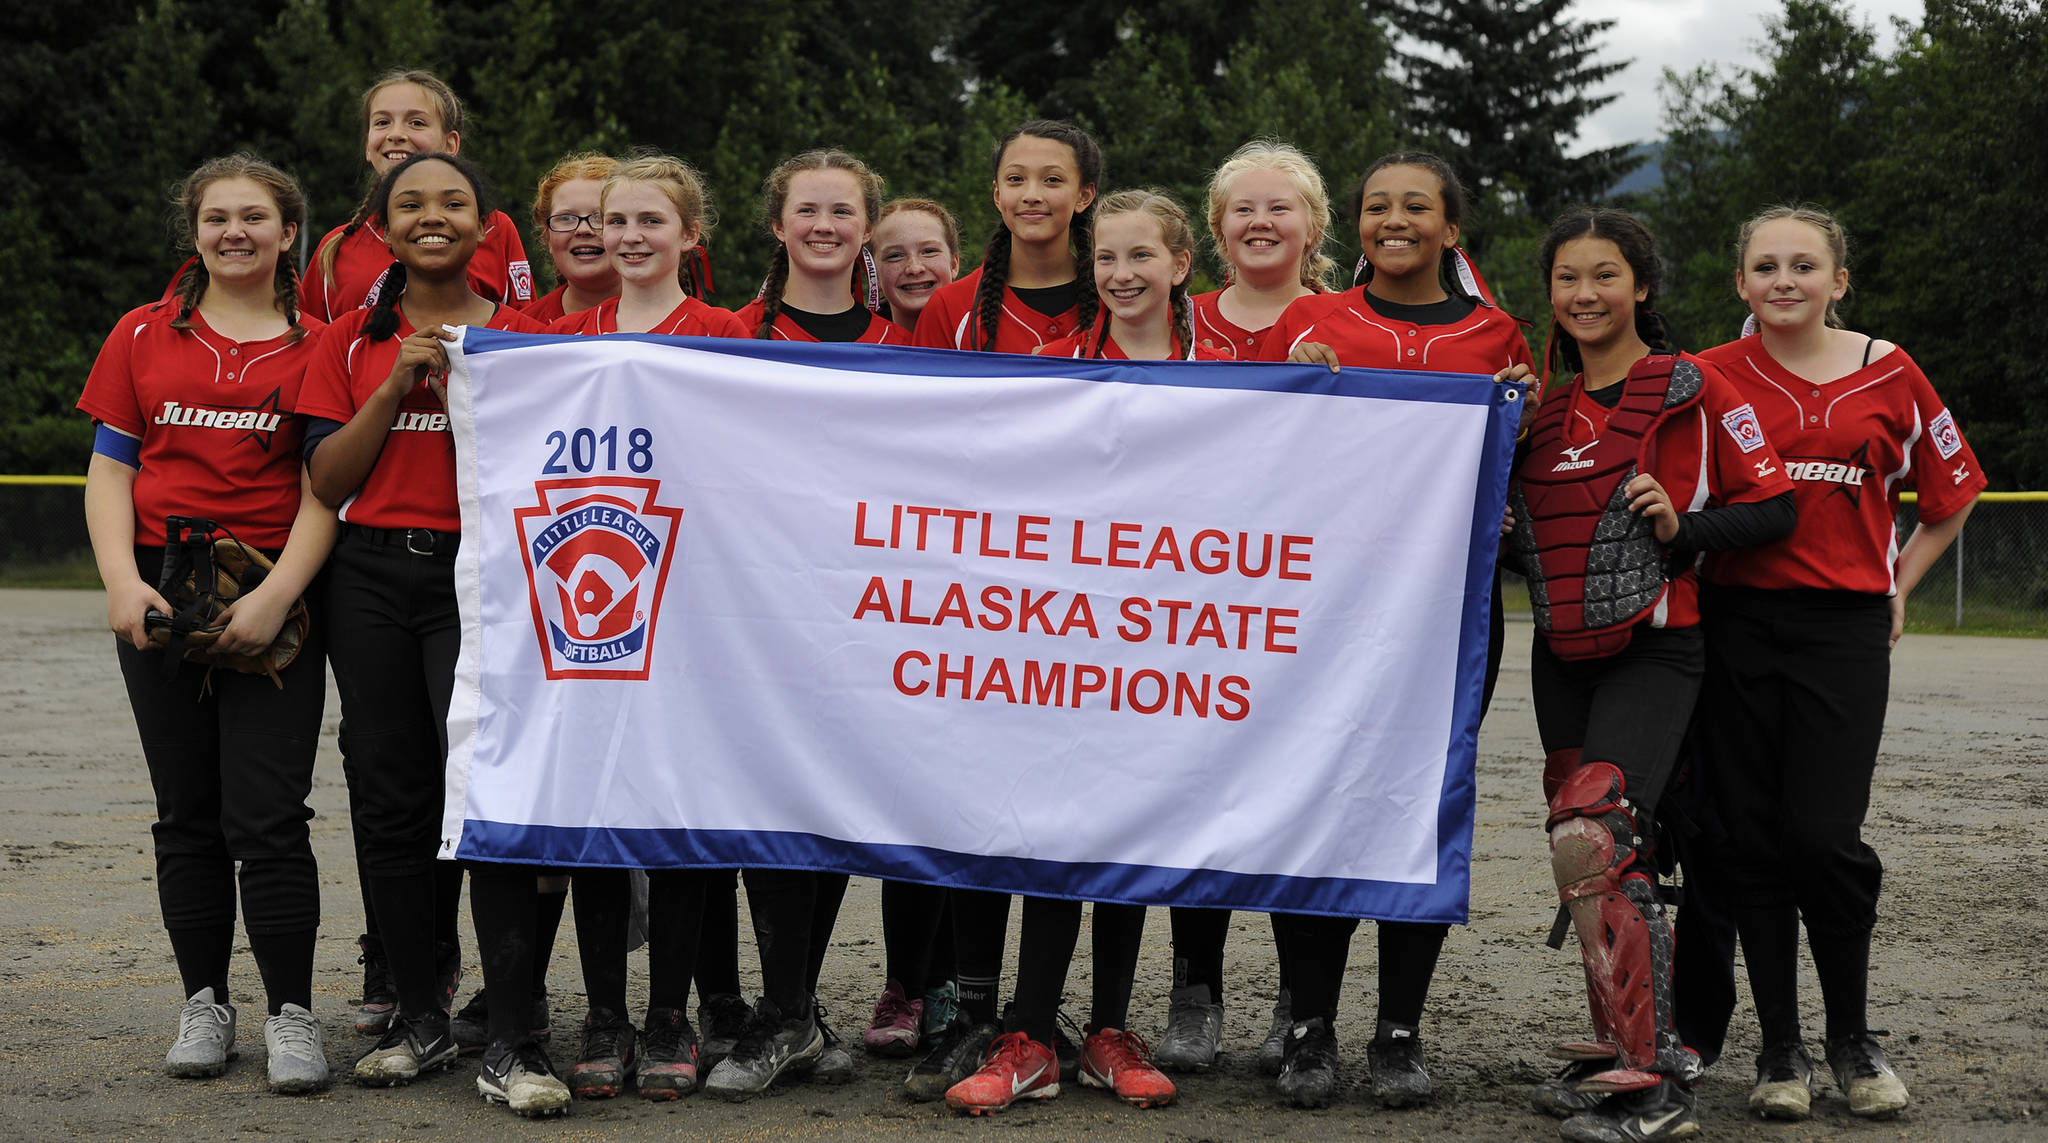 The Gastineau Channel Little League Major Softball all-stars pose with the state championship banner after defeating Anchorage’s Abbott-O-Rabbit, 7-5, to win the state championship on Saturday at Melvin Park. (Nolin Ainsworth | Juneau Empire)